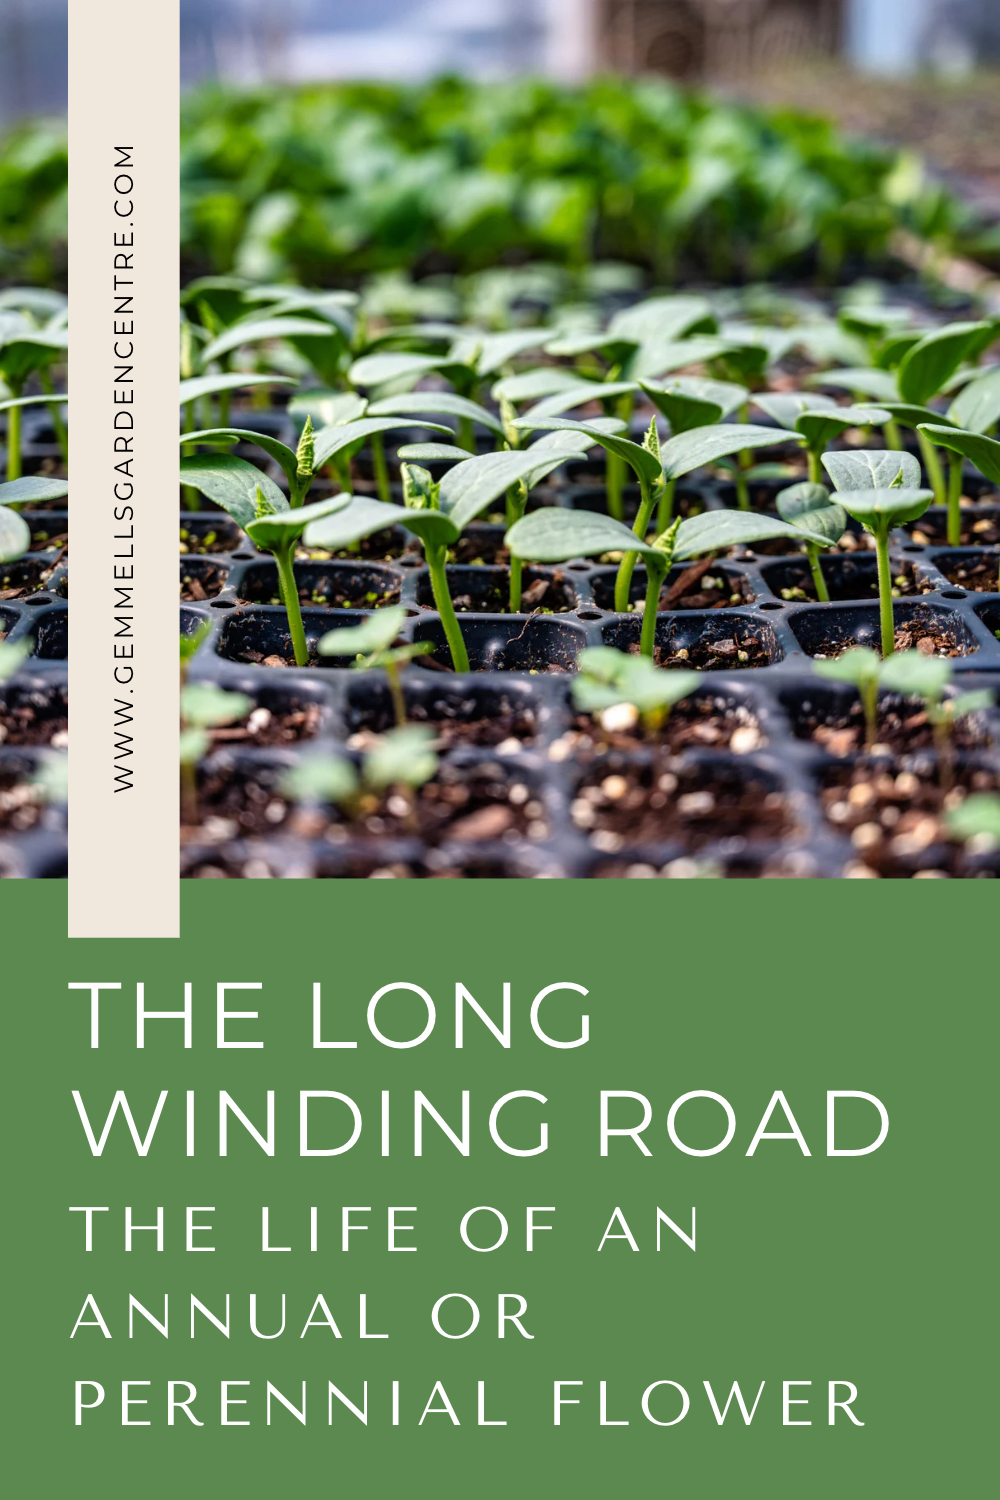 The Life of an Annual or Perennial Flower | The Long and Winding Road